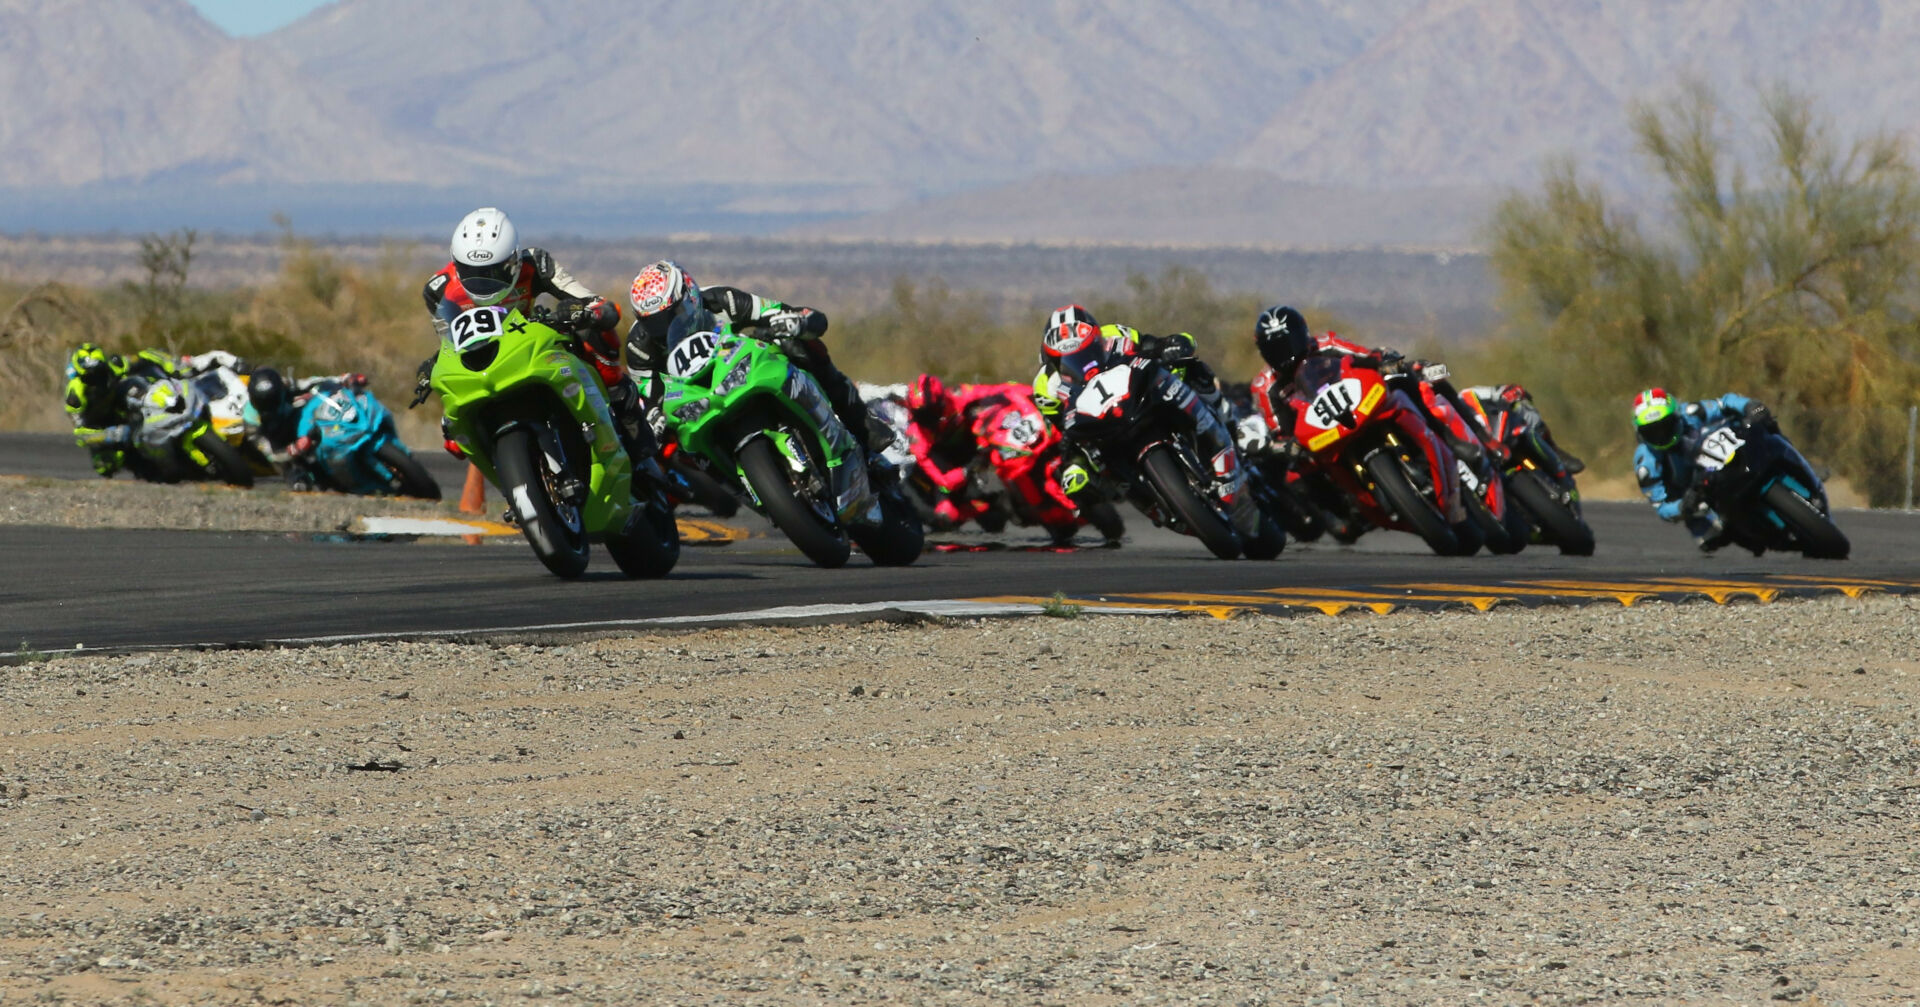 David Kohlstaedt (29x), Brenden Ketelsen (441), Michael Gilbert (1), Jeffrey Tigert (911), Deion Campbell (194), Joel Ohman (92), and the rest of the field early in the Supersport Middleweight Shootout. Photo by CaliPhotography.com, courtesy CVMA.